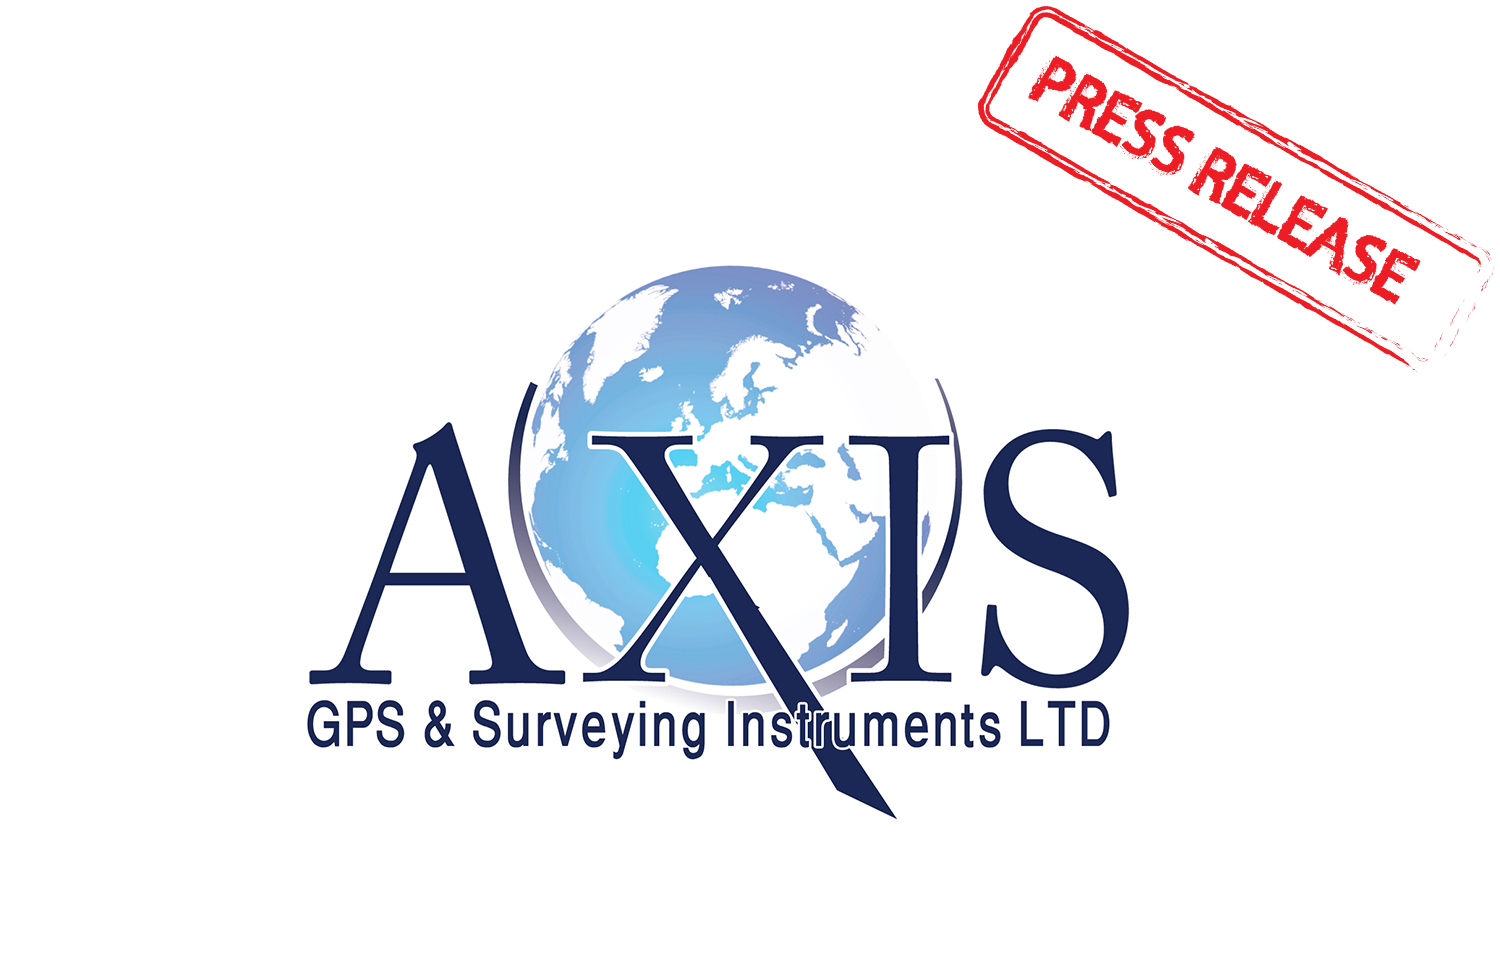 AXIS-GPS to Provide Applanix Products and Solutions for Land and Air Survey Customers in Israel